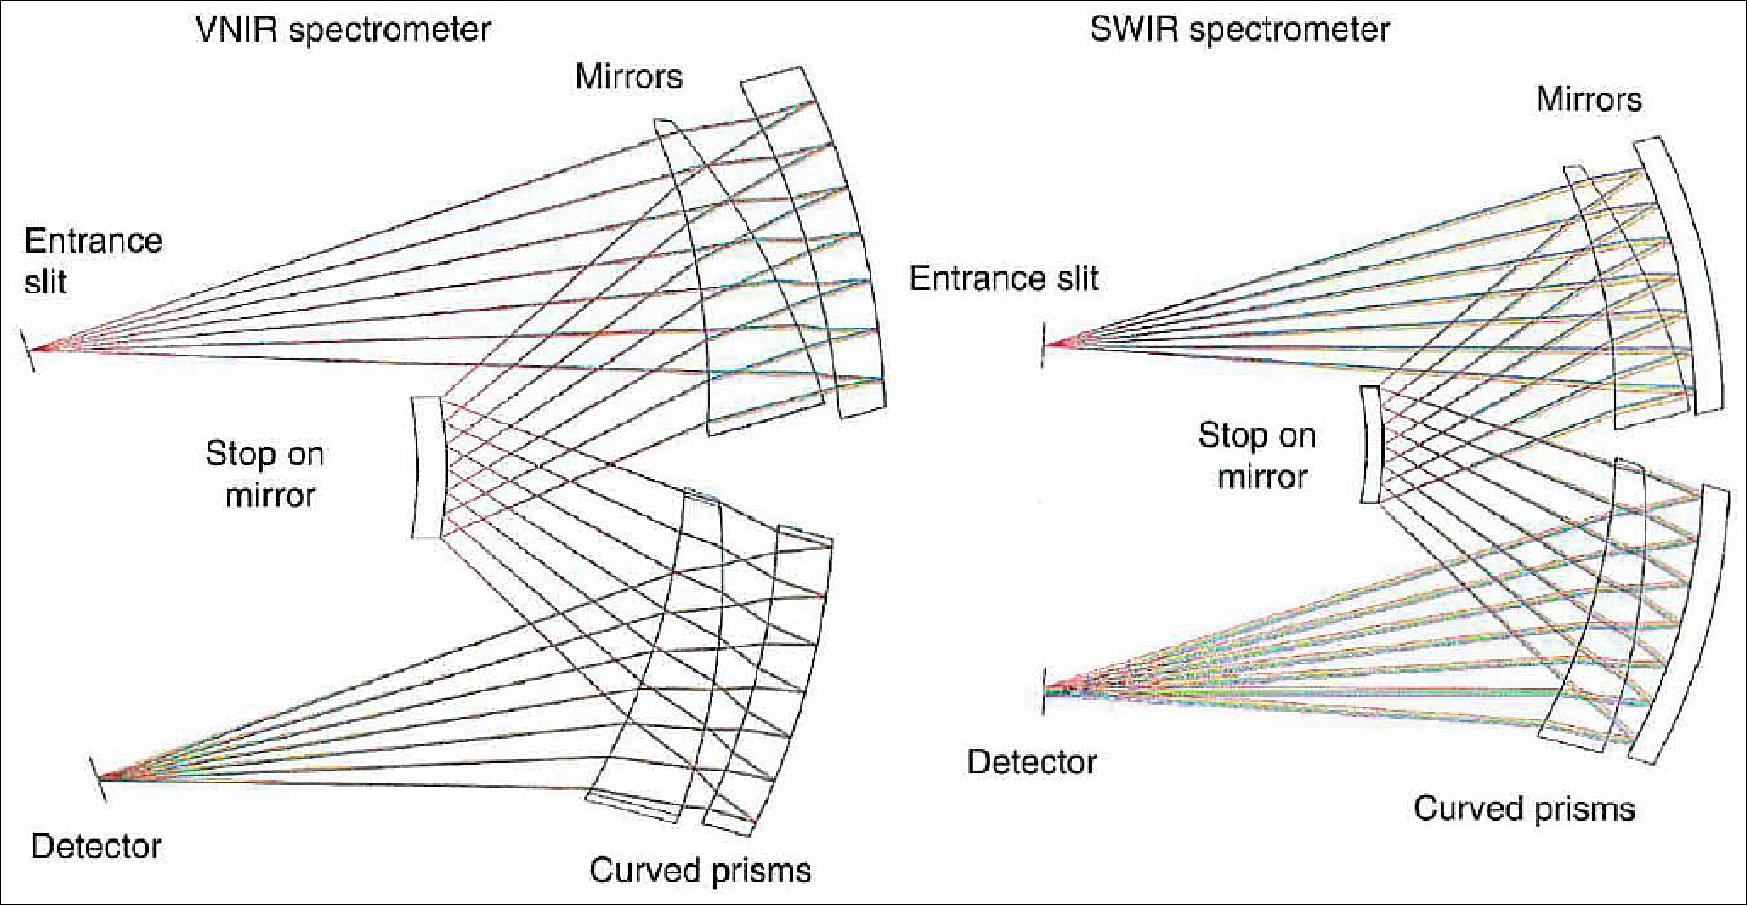 Figure 22: Both spectrometers, VNIR (left) and SWIR (right), employ curved prisms as dispersion and image forming elements. Tue designs are based on unit magnification Offner relays with a stop on the central mirror. Both plots have the same scale (image credit: OHB)